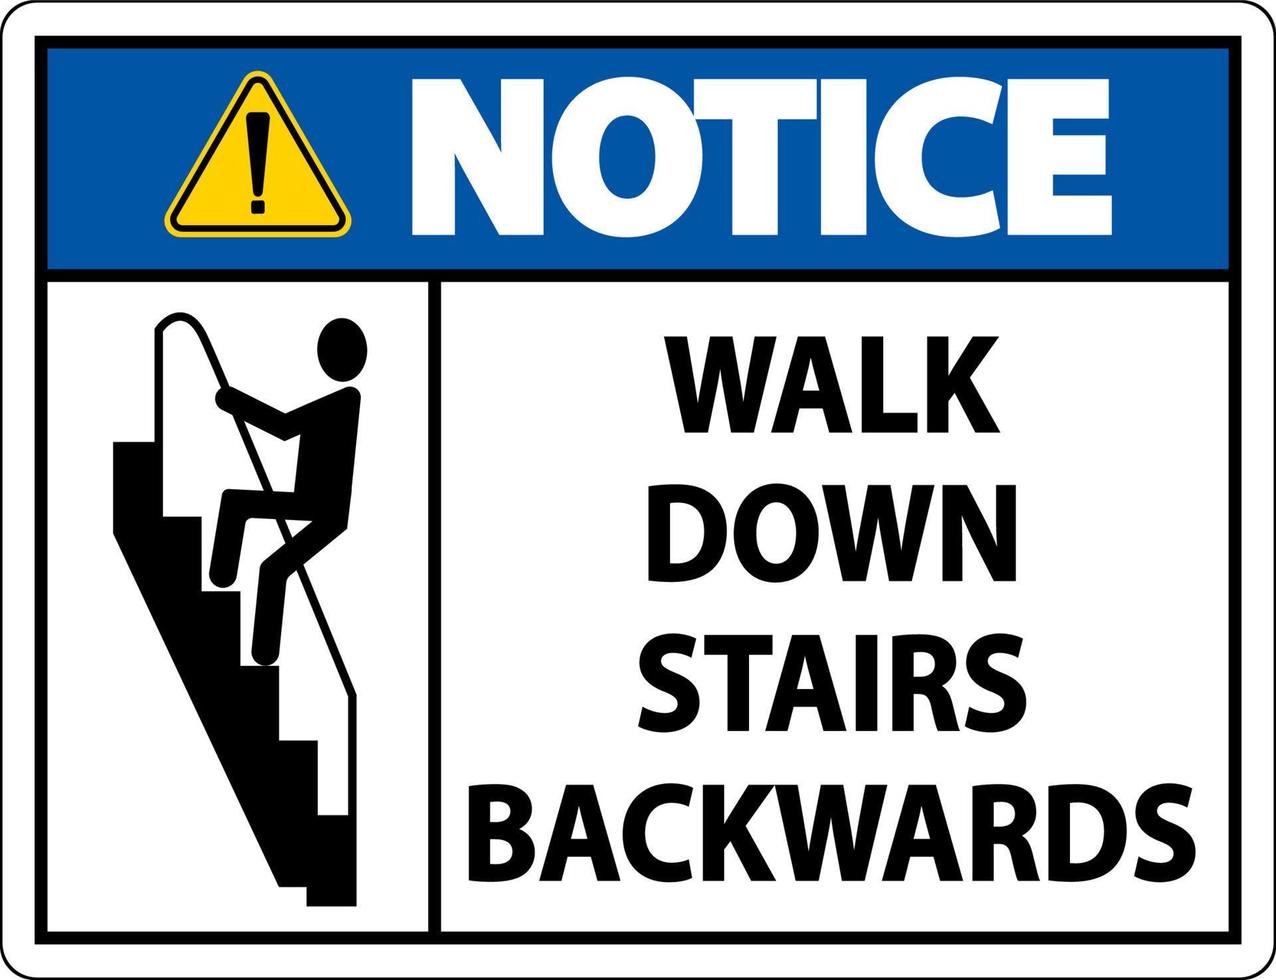 Notice Walk Down Stairs Backwards Sign vector